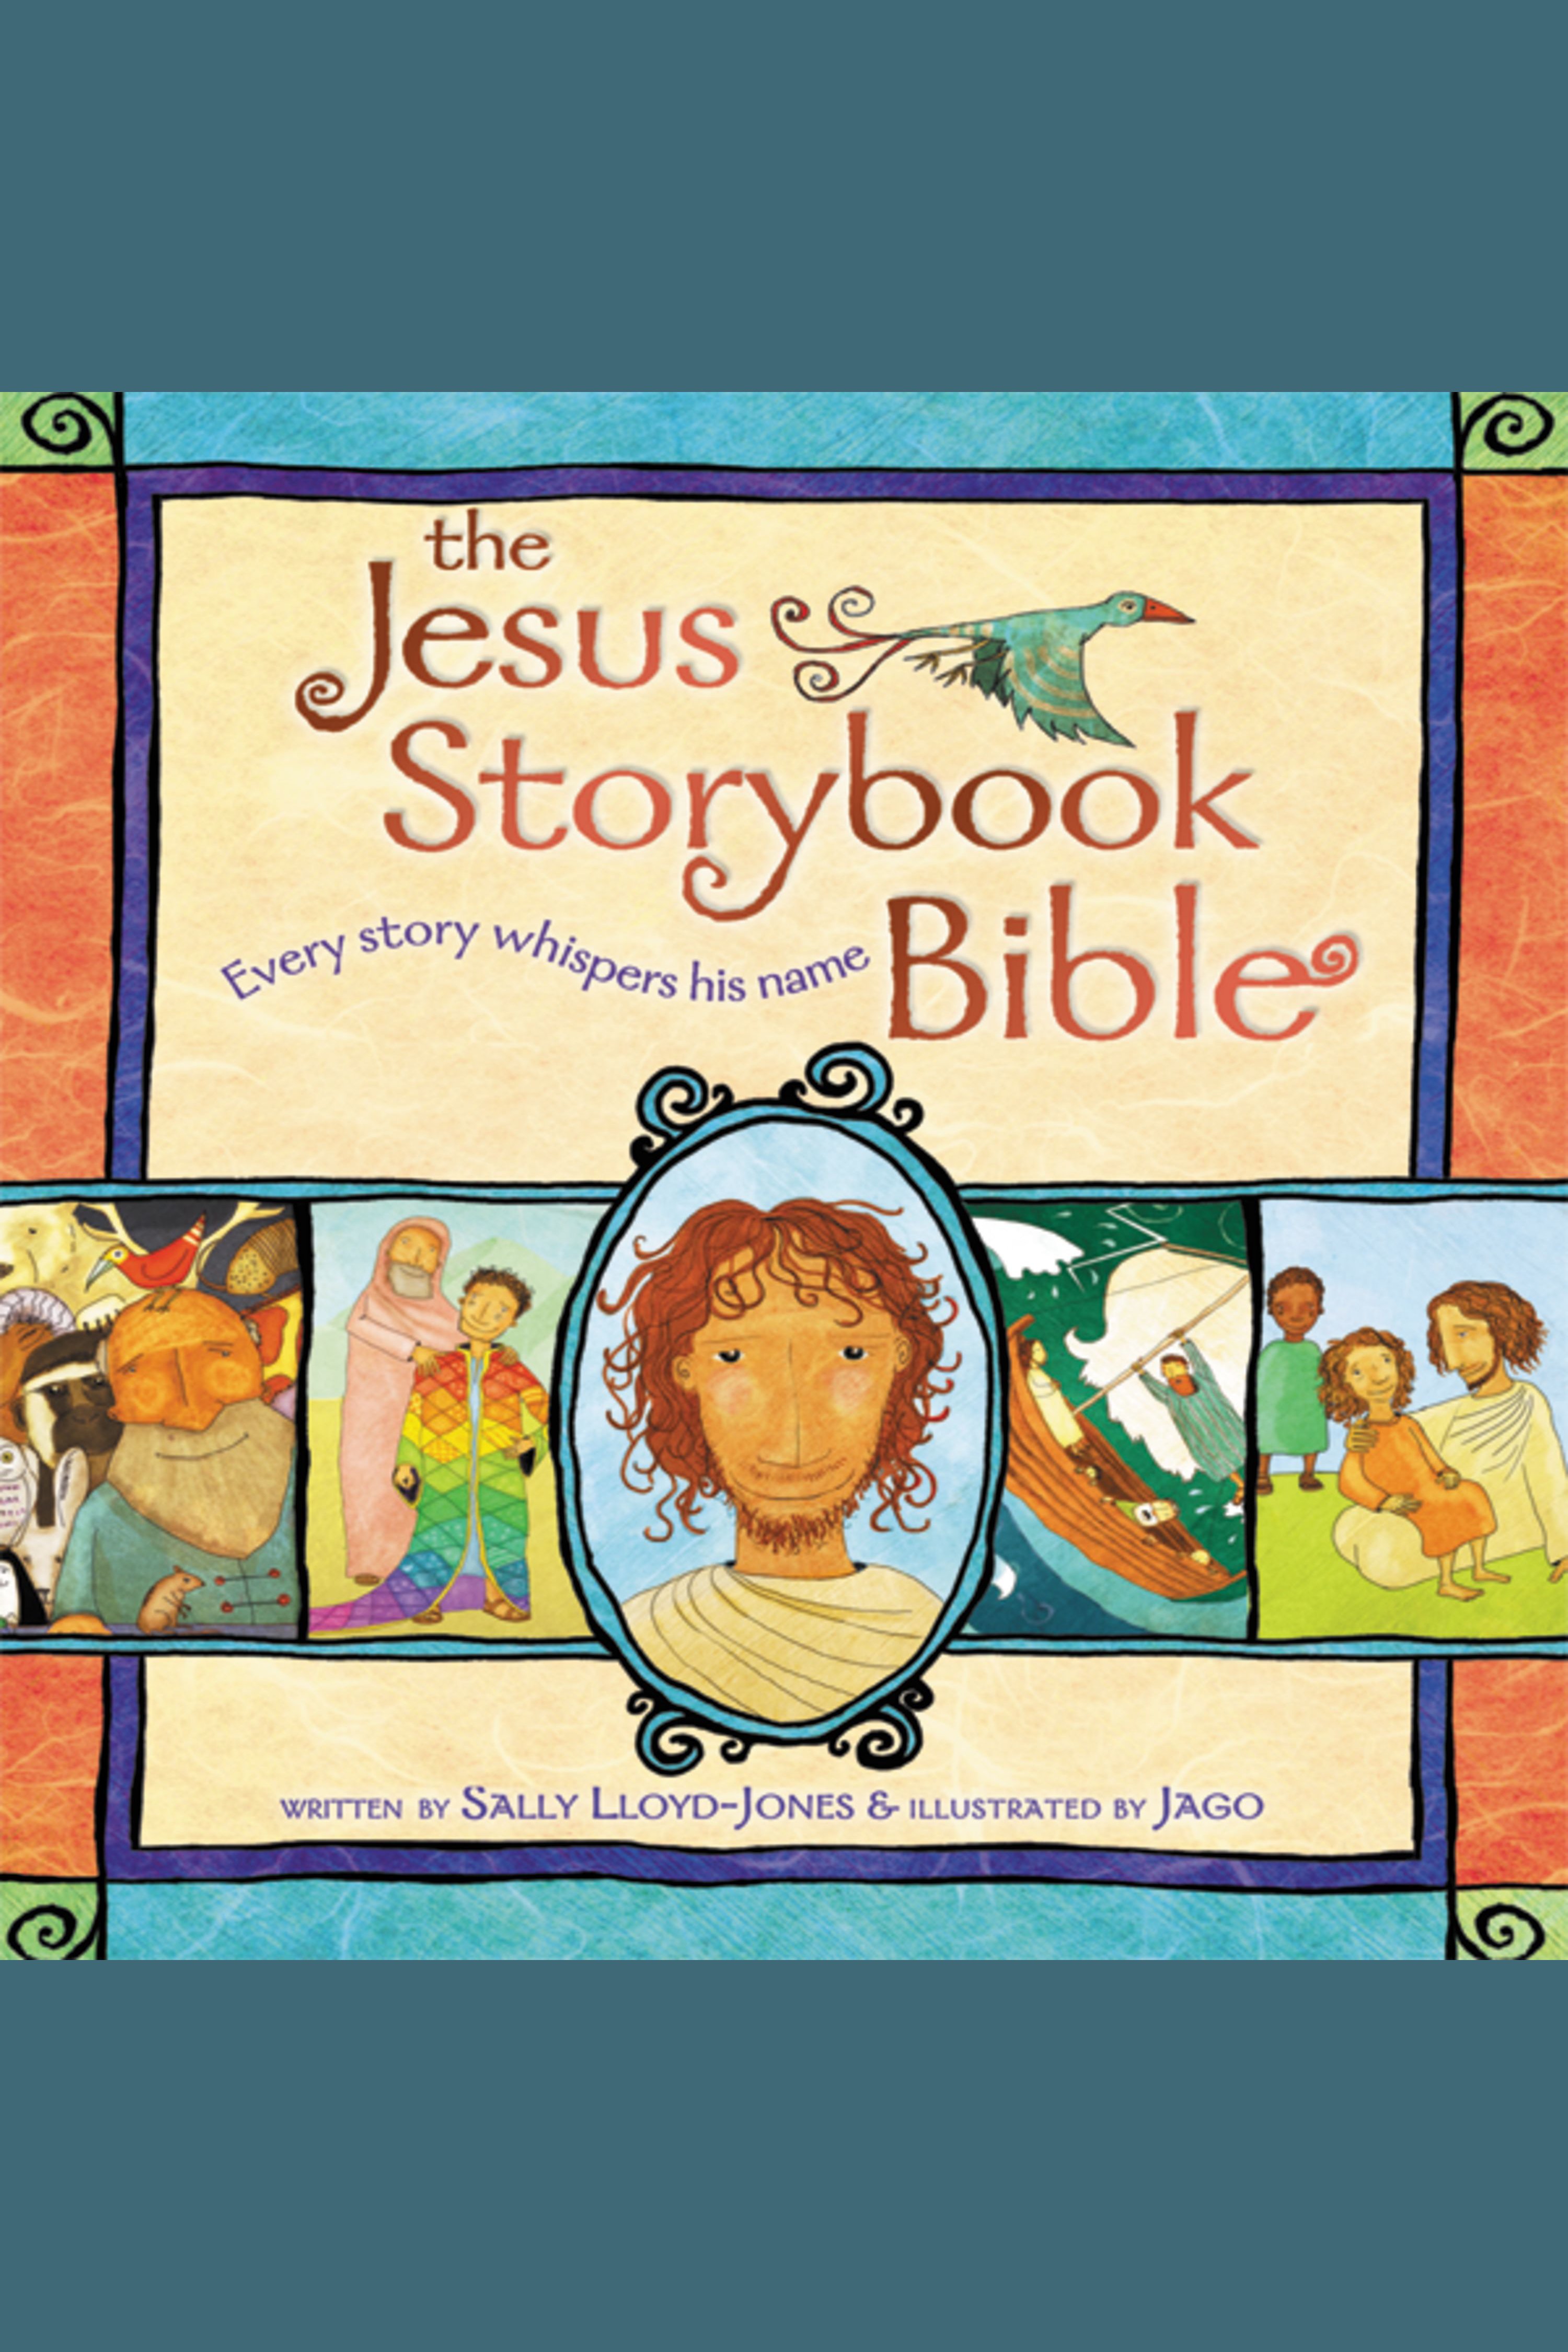 The Jesus storybook Bible every story whispers his name cover image